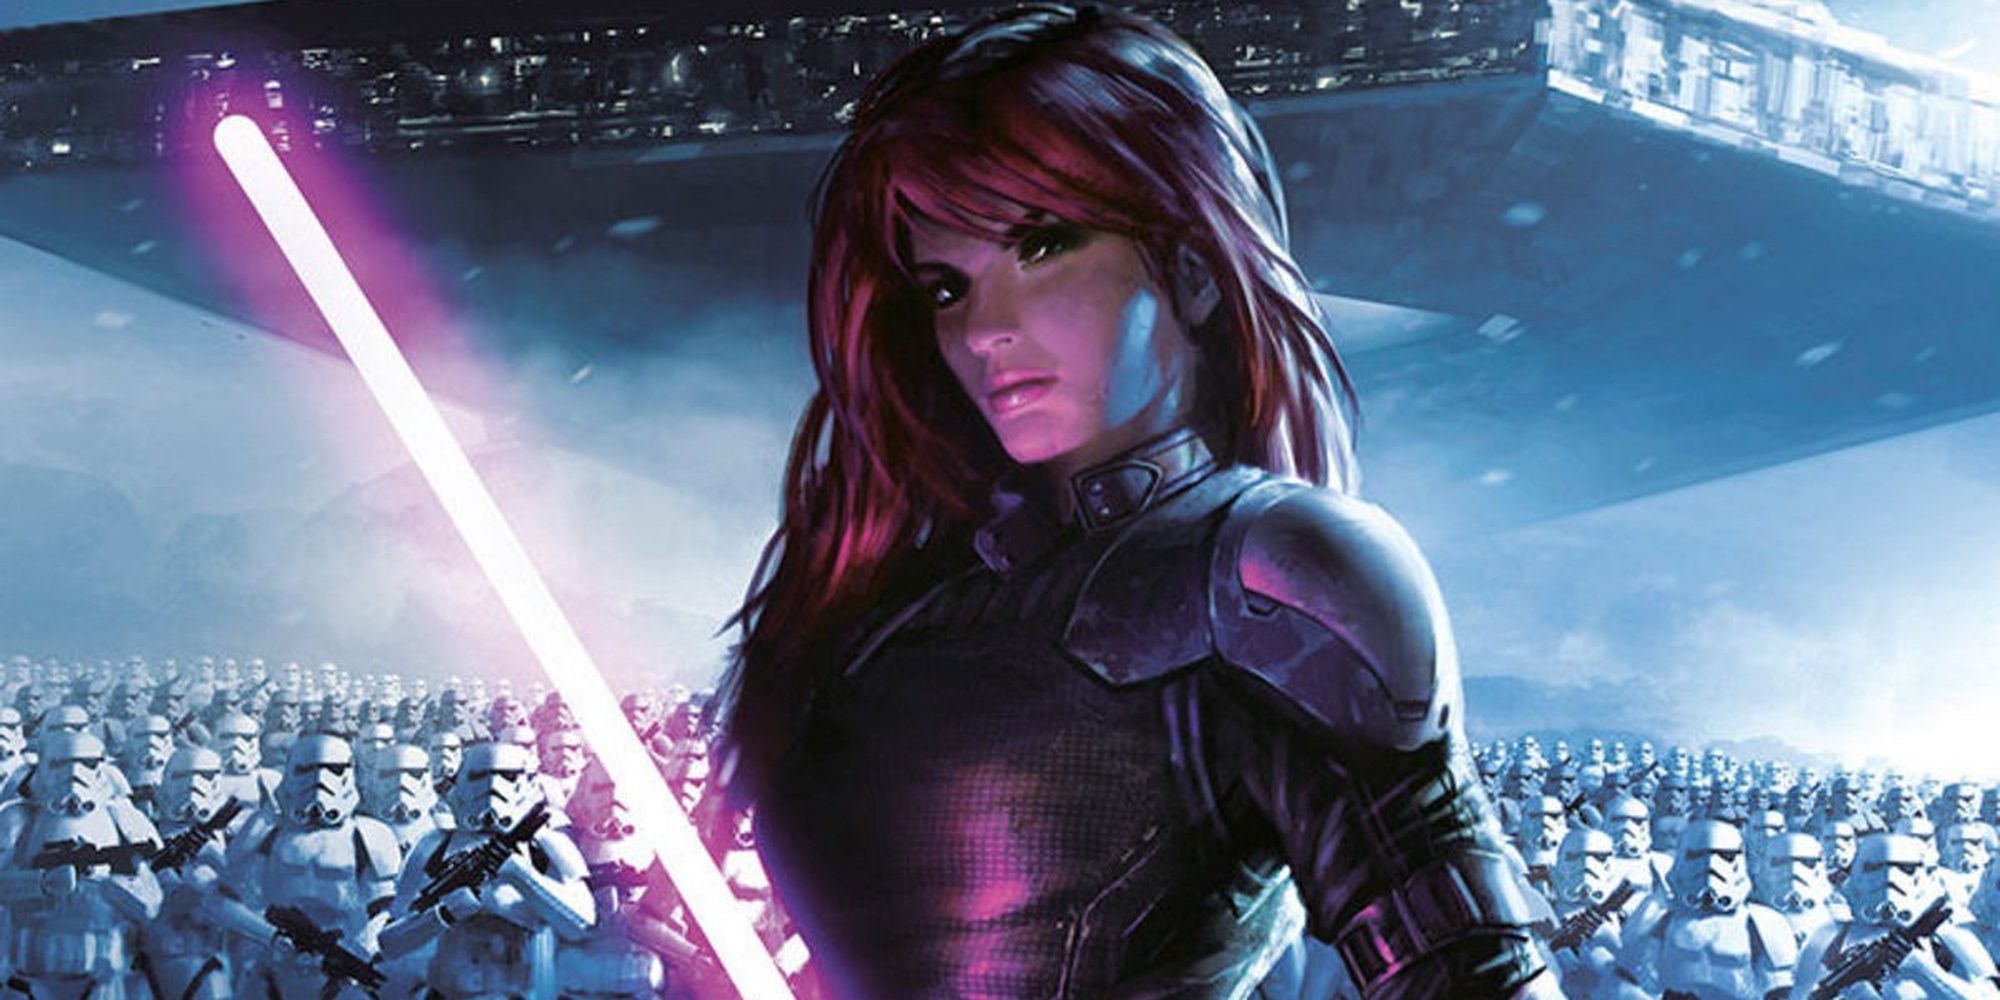 Mara Jade with the Imperial army at her back.